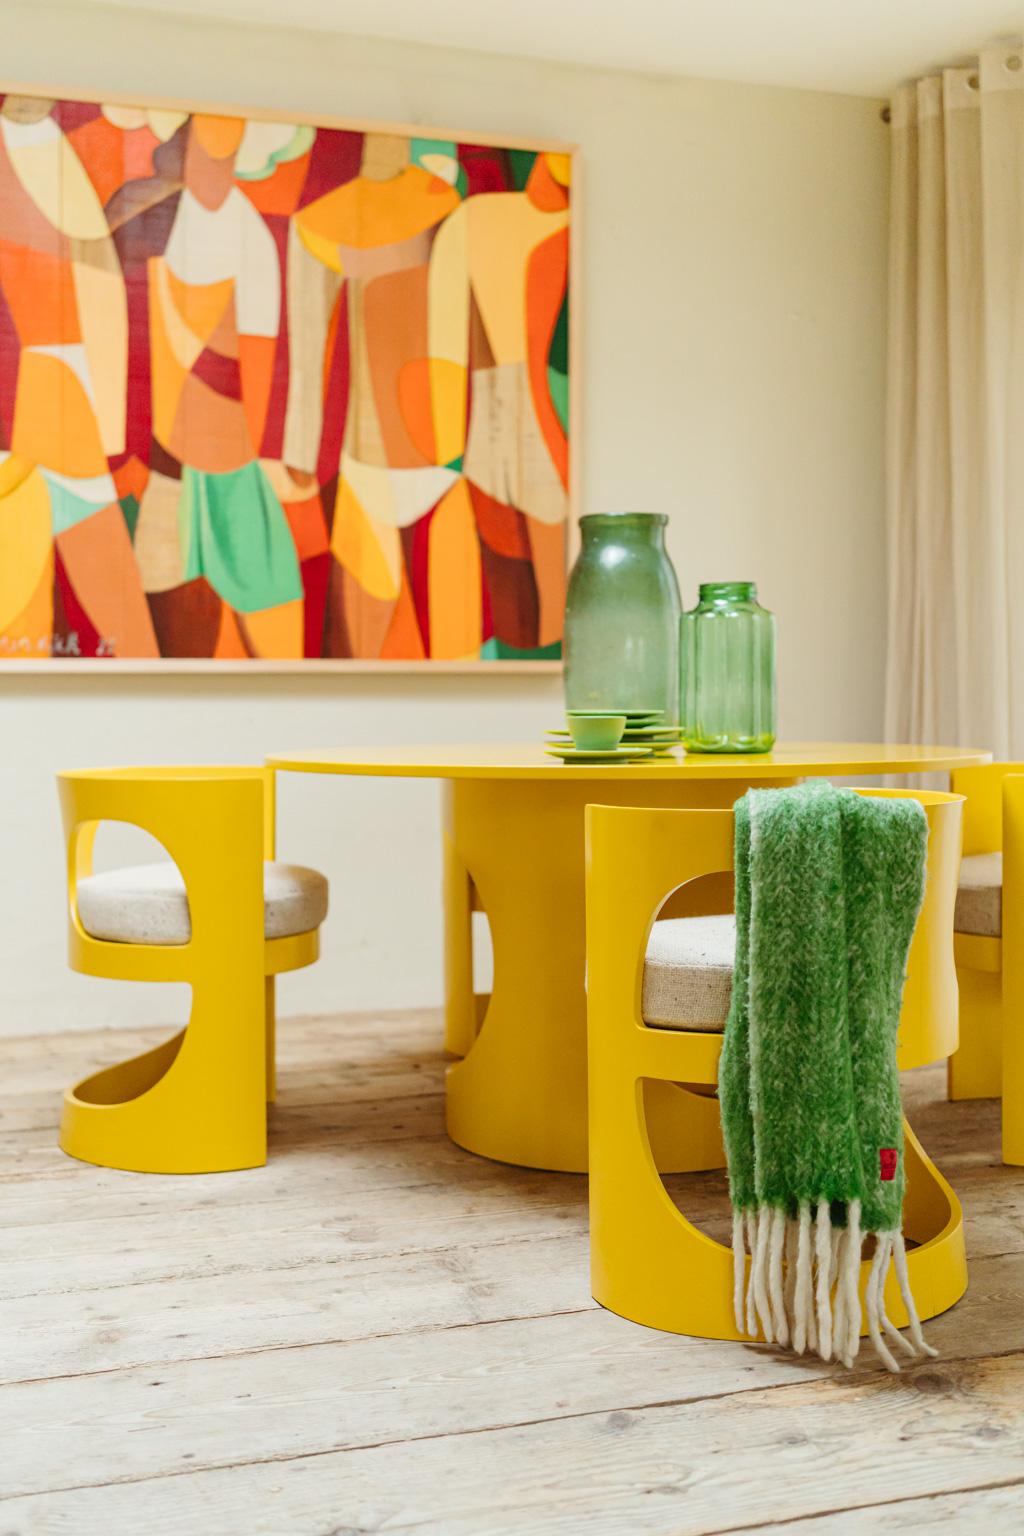 A rare dining room set consisting of one round table with four matching chairs.
Designed in 1969 by Arne Jacobsen, this is one of his last creations. Made of vibrant yellow lacquered birch plywood manufactured by Asko in Finland. The chairs base is